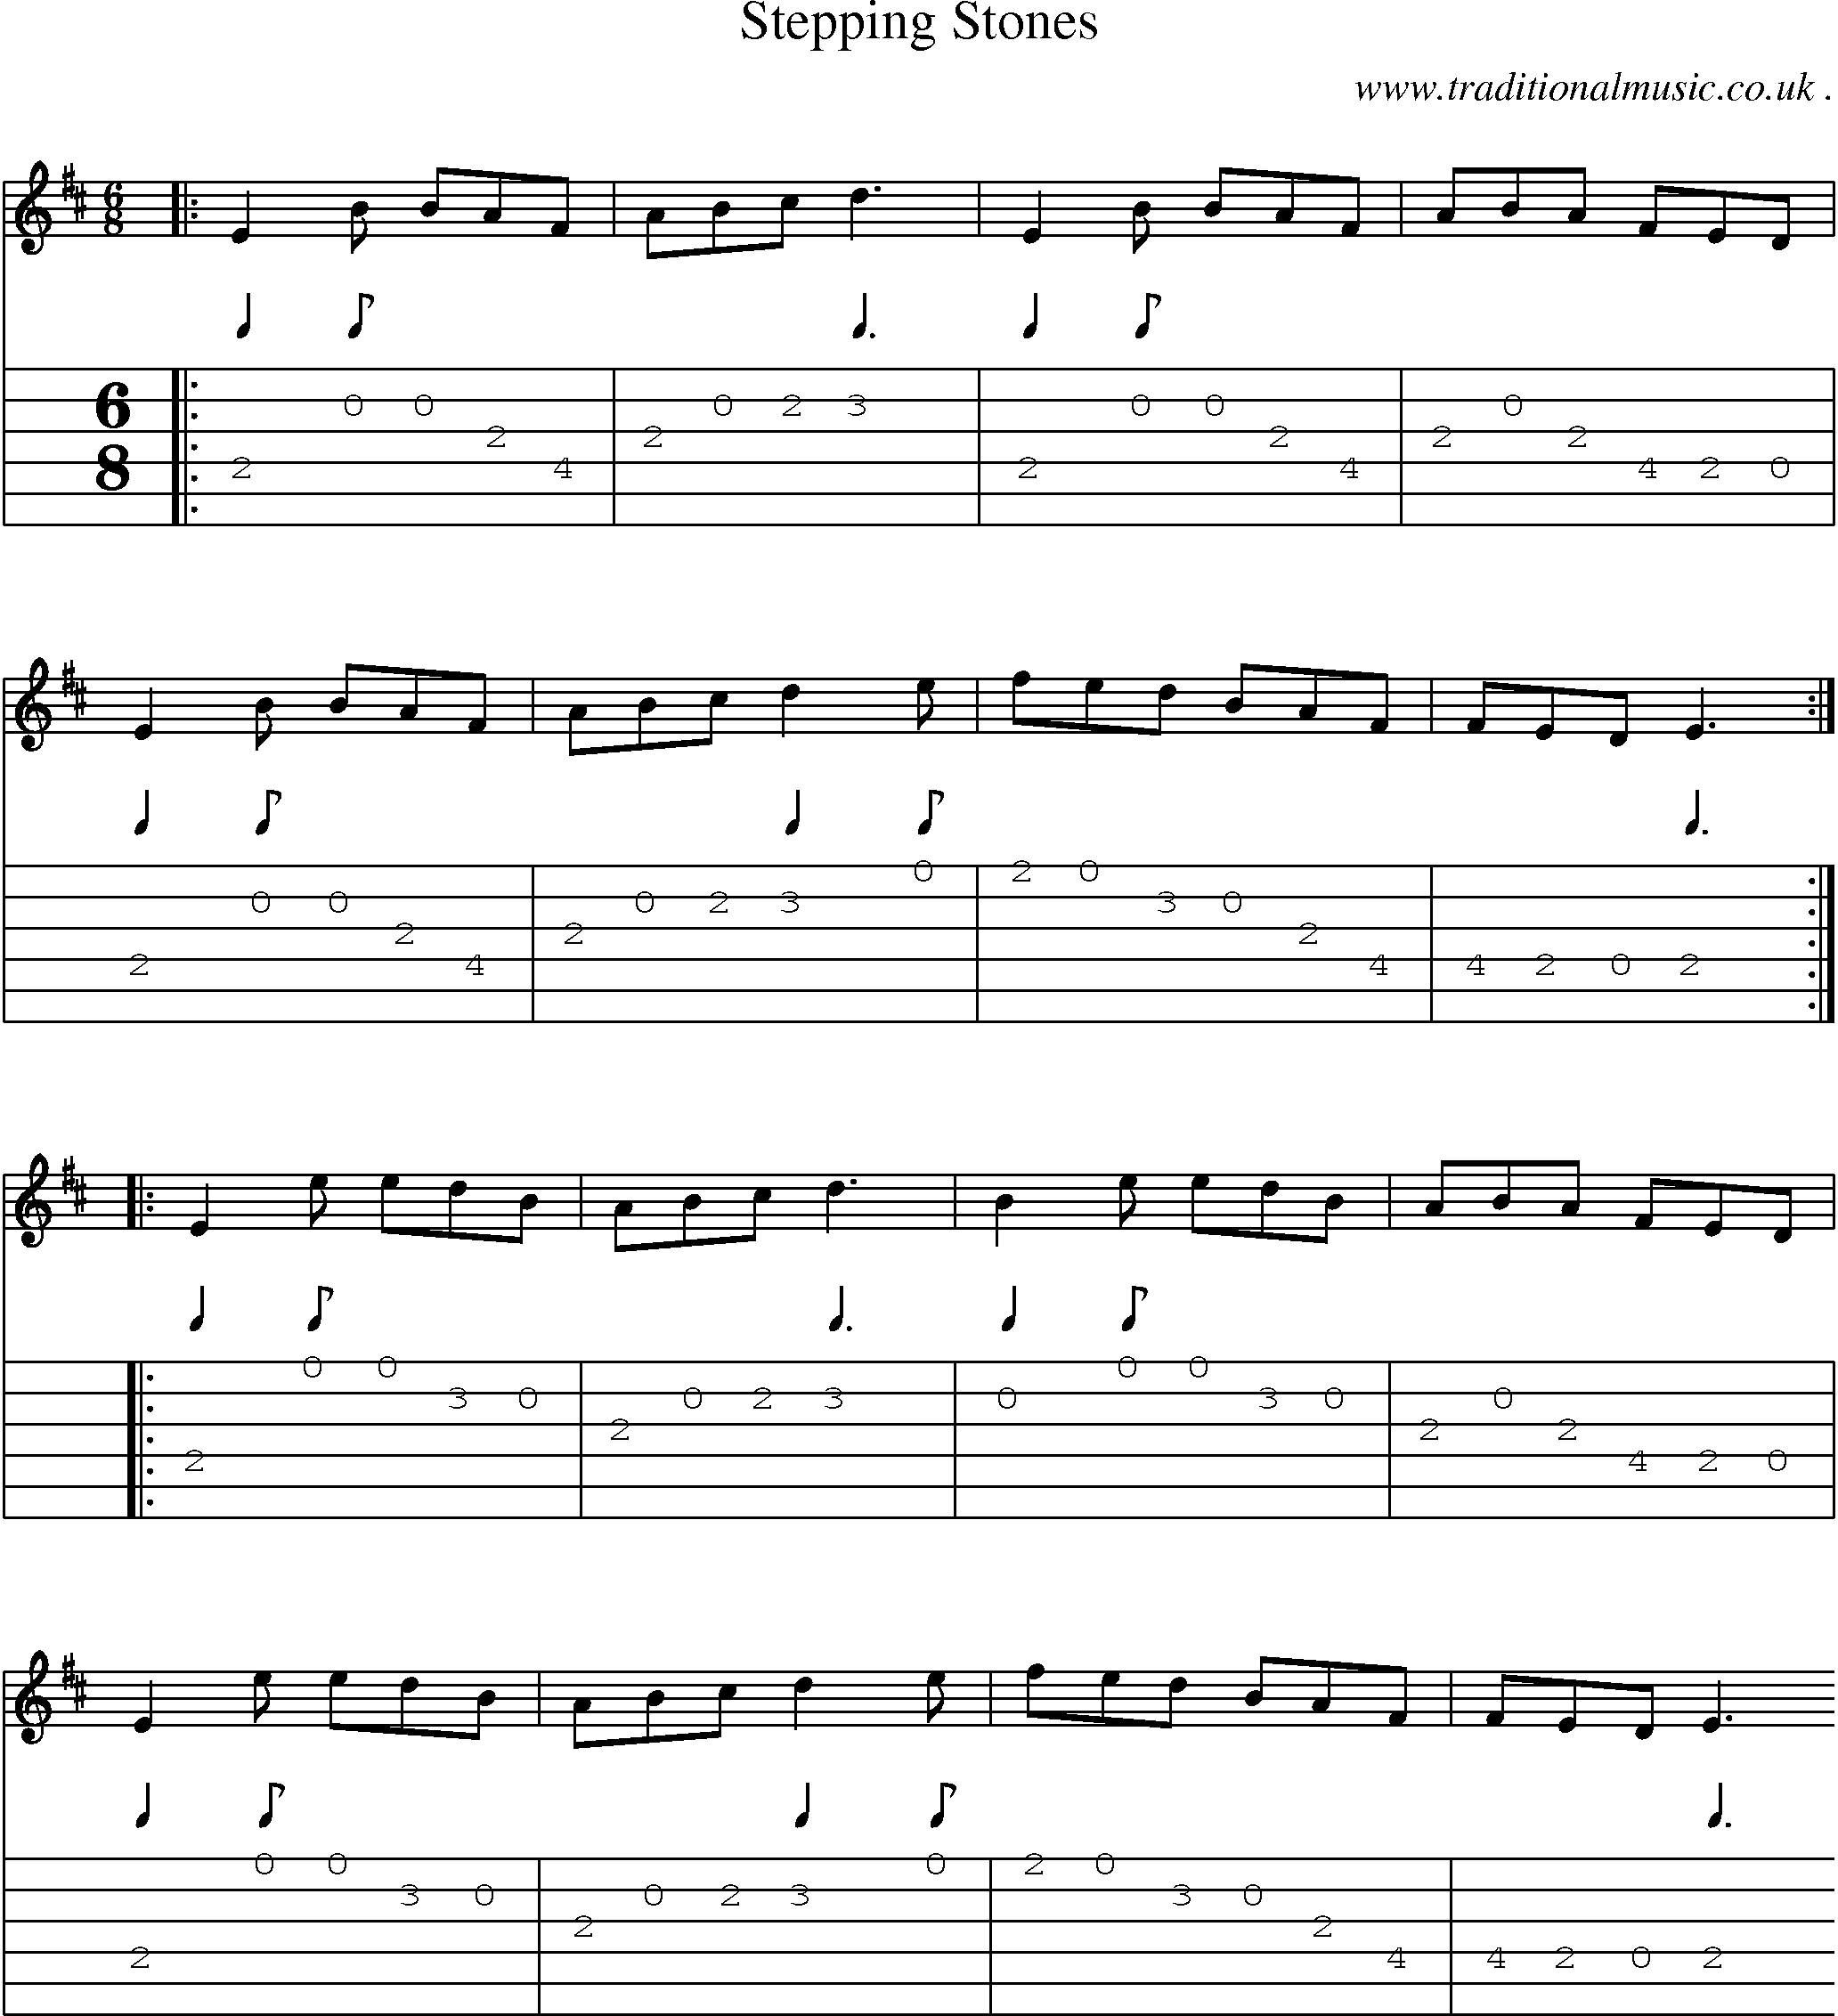 Sheet-Music and Guitar Tabs for Stepping Stones